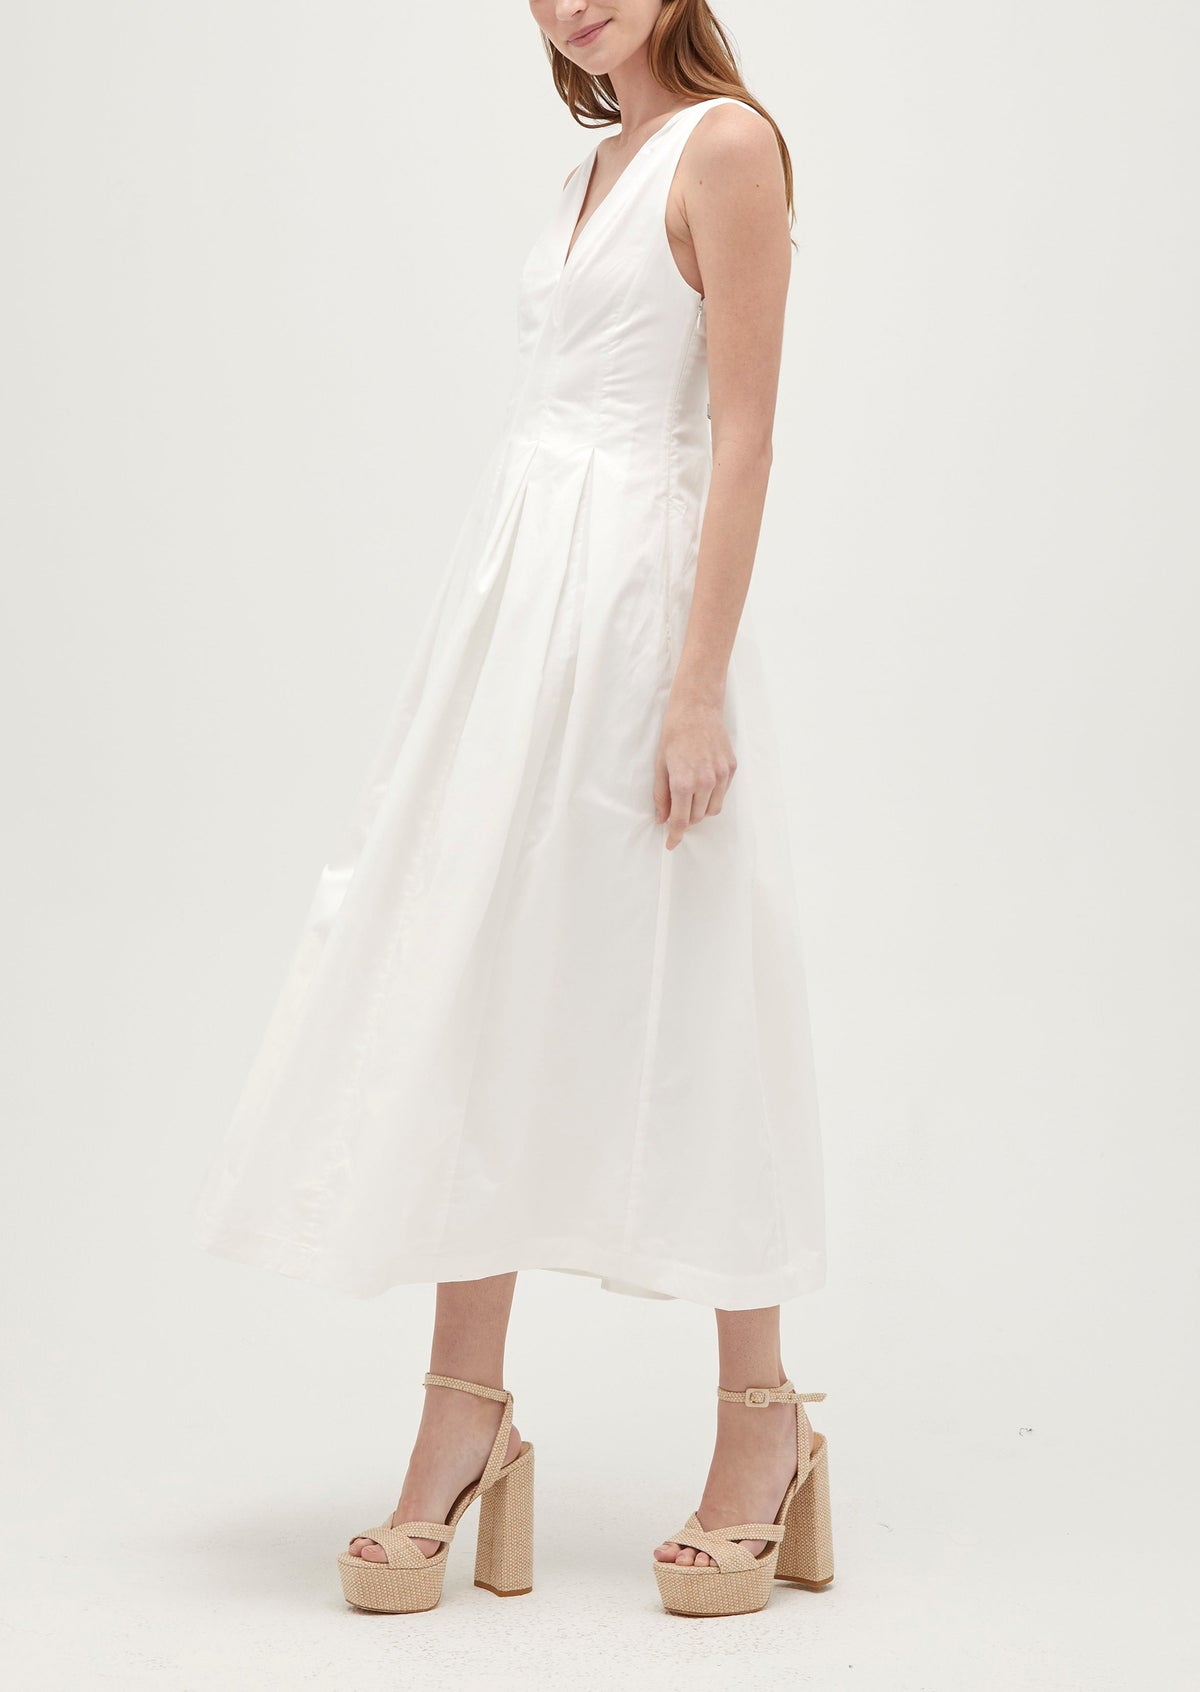 Ava is 5’9” and wears a size XS in the White Cotton Sateen color: White Cotton Sateen